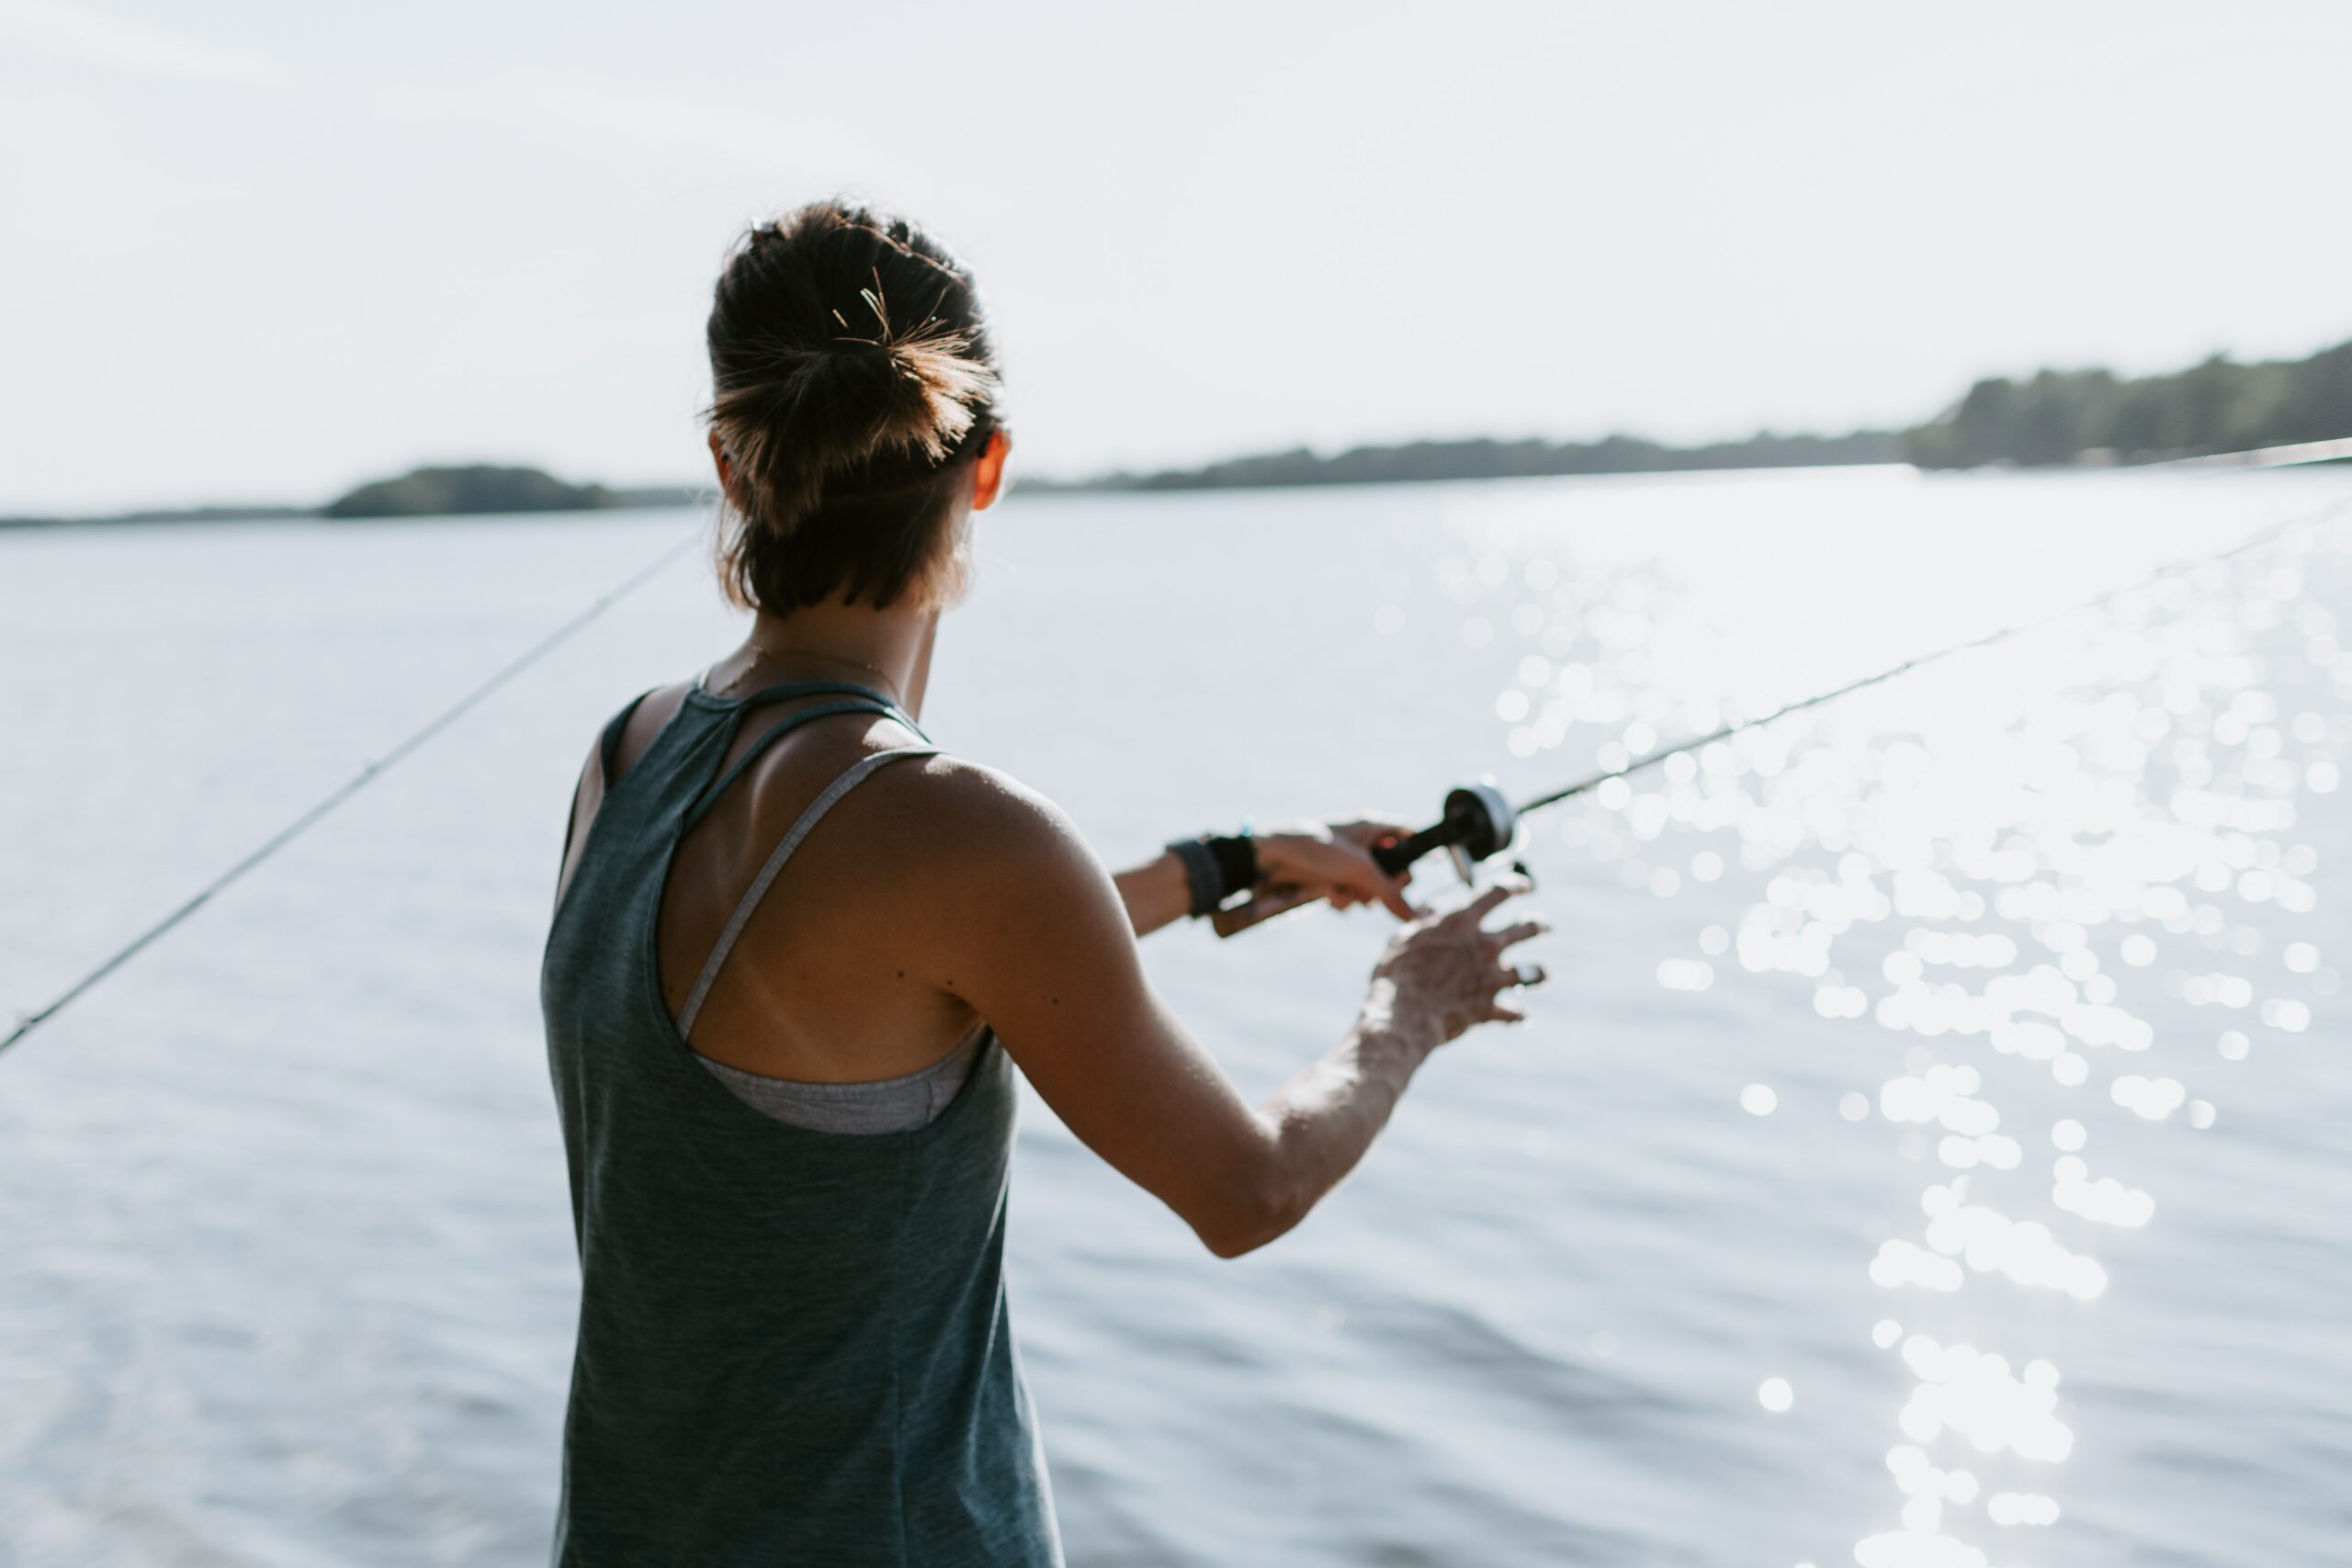 fishing gifts for moms. woman fishing on a lake.